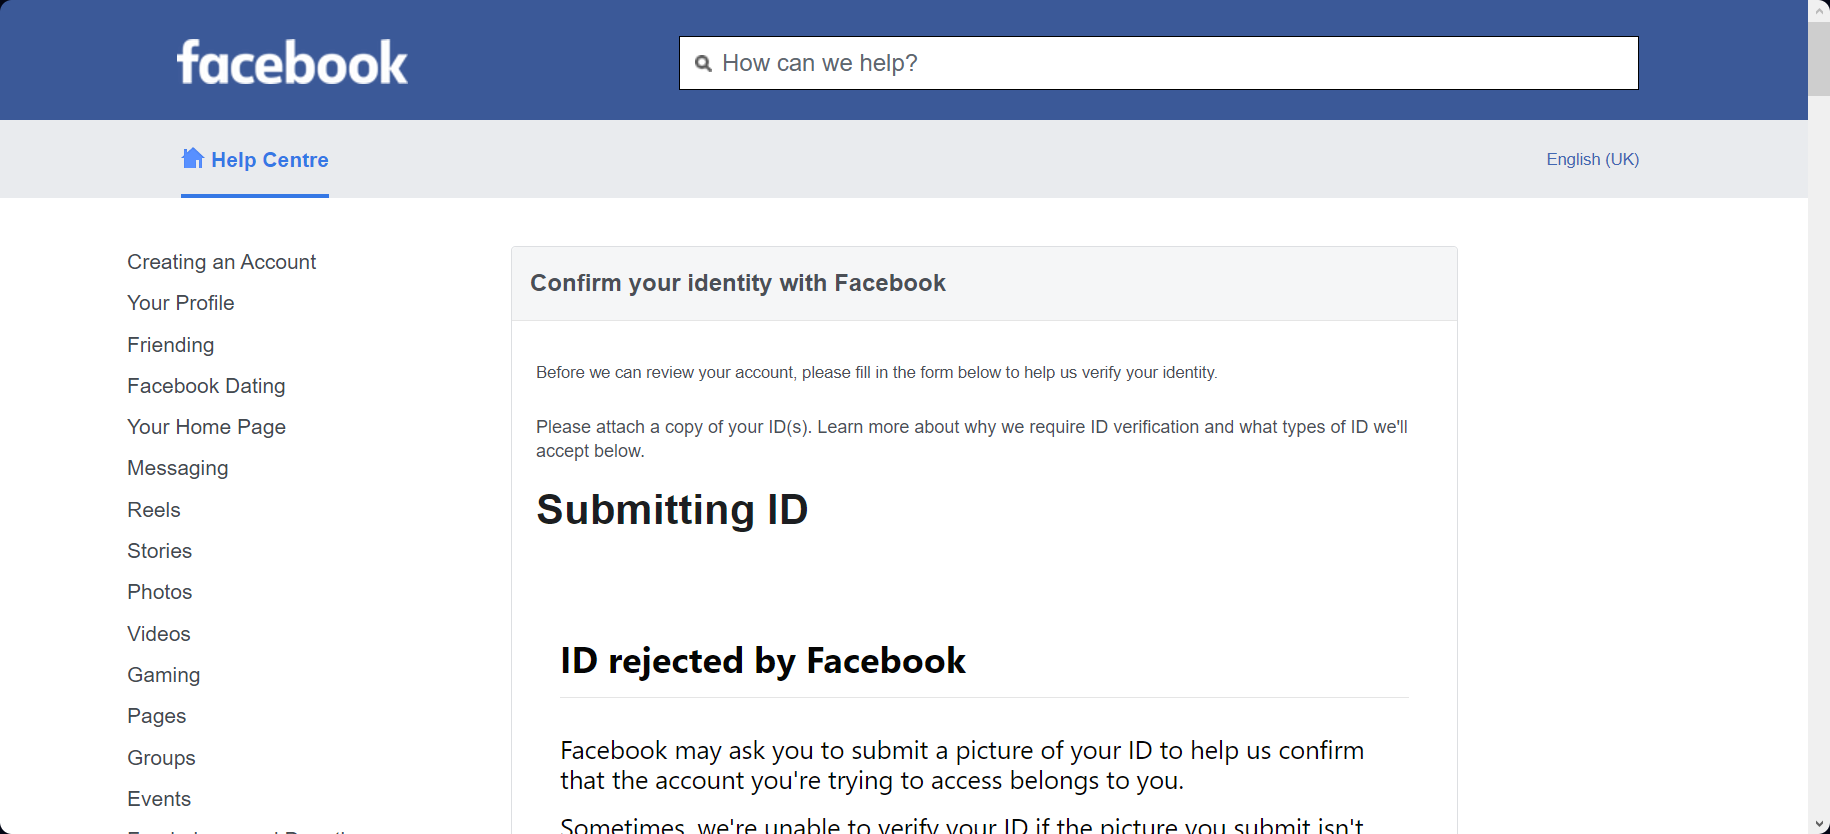 Access Facebook's Verify Your Account page